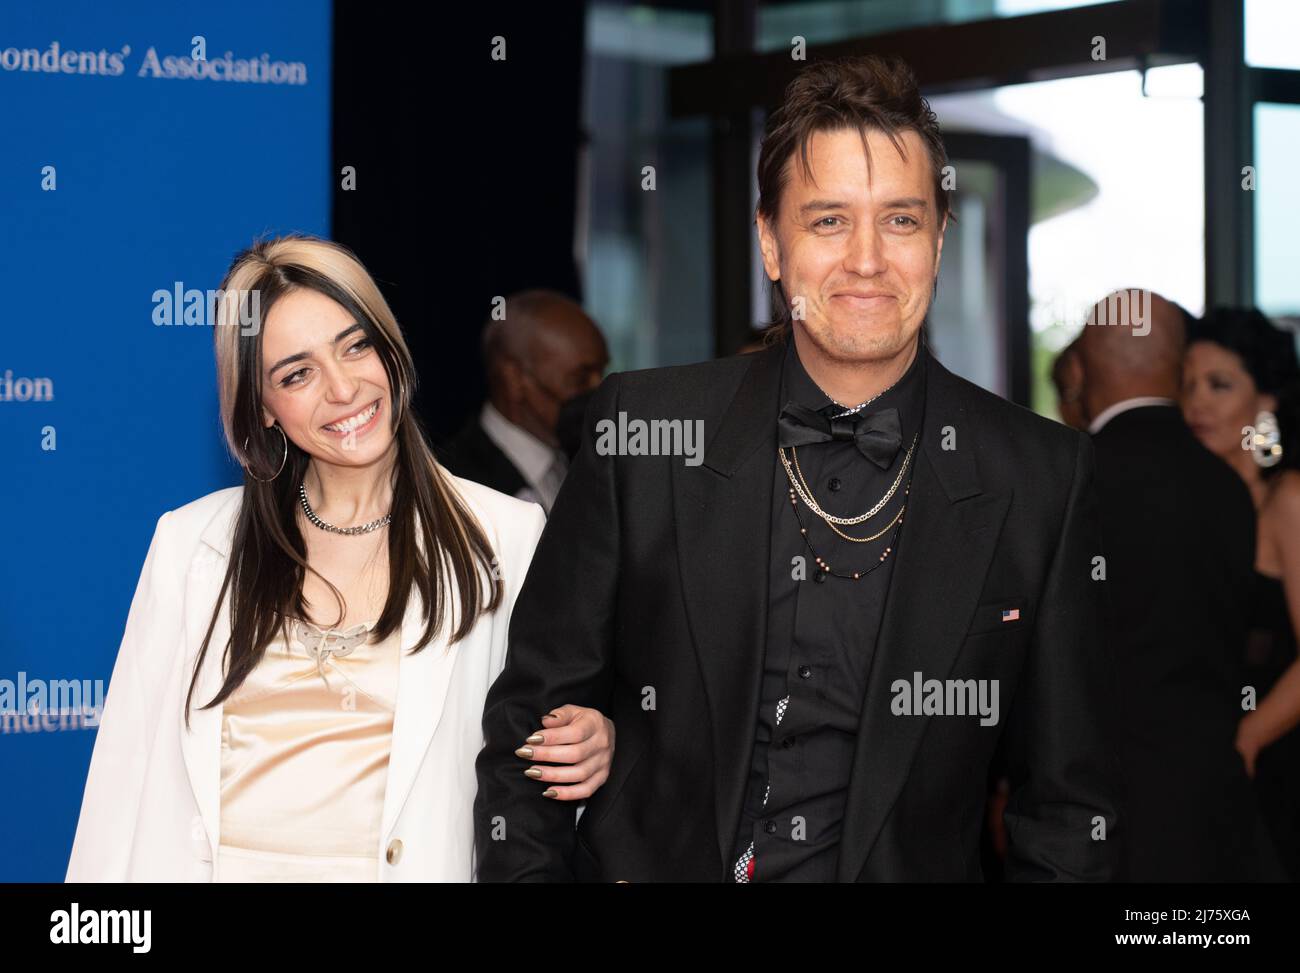 Julian Casablancas and Kaya Nichols walk the red carpet at the White House Correspondents' Association Dinner at the Washington Hilton in Washington D.C. on April 30, 2022. Singer Julian Casablancas is best known as the lead vocalist and primary songwriter of rock band The Strokes.  (Photo by Jeff Malet) Photo via Newscom Stock Photo